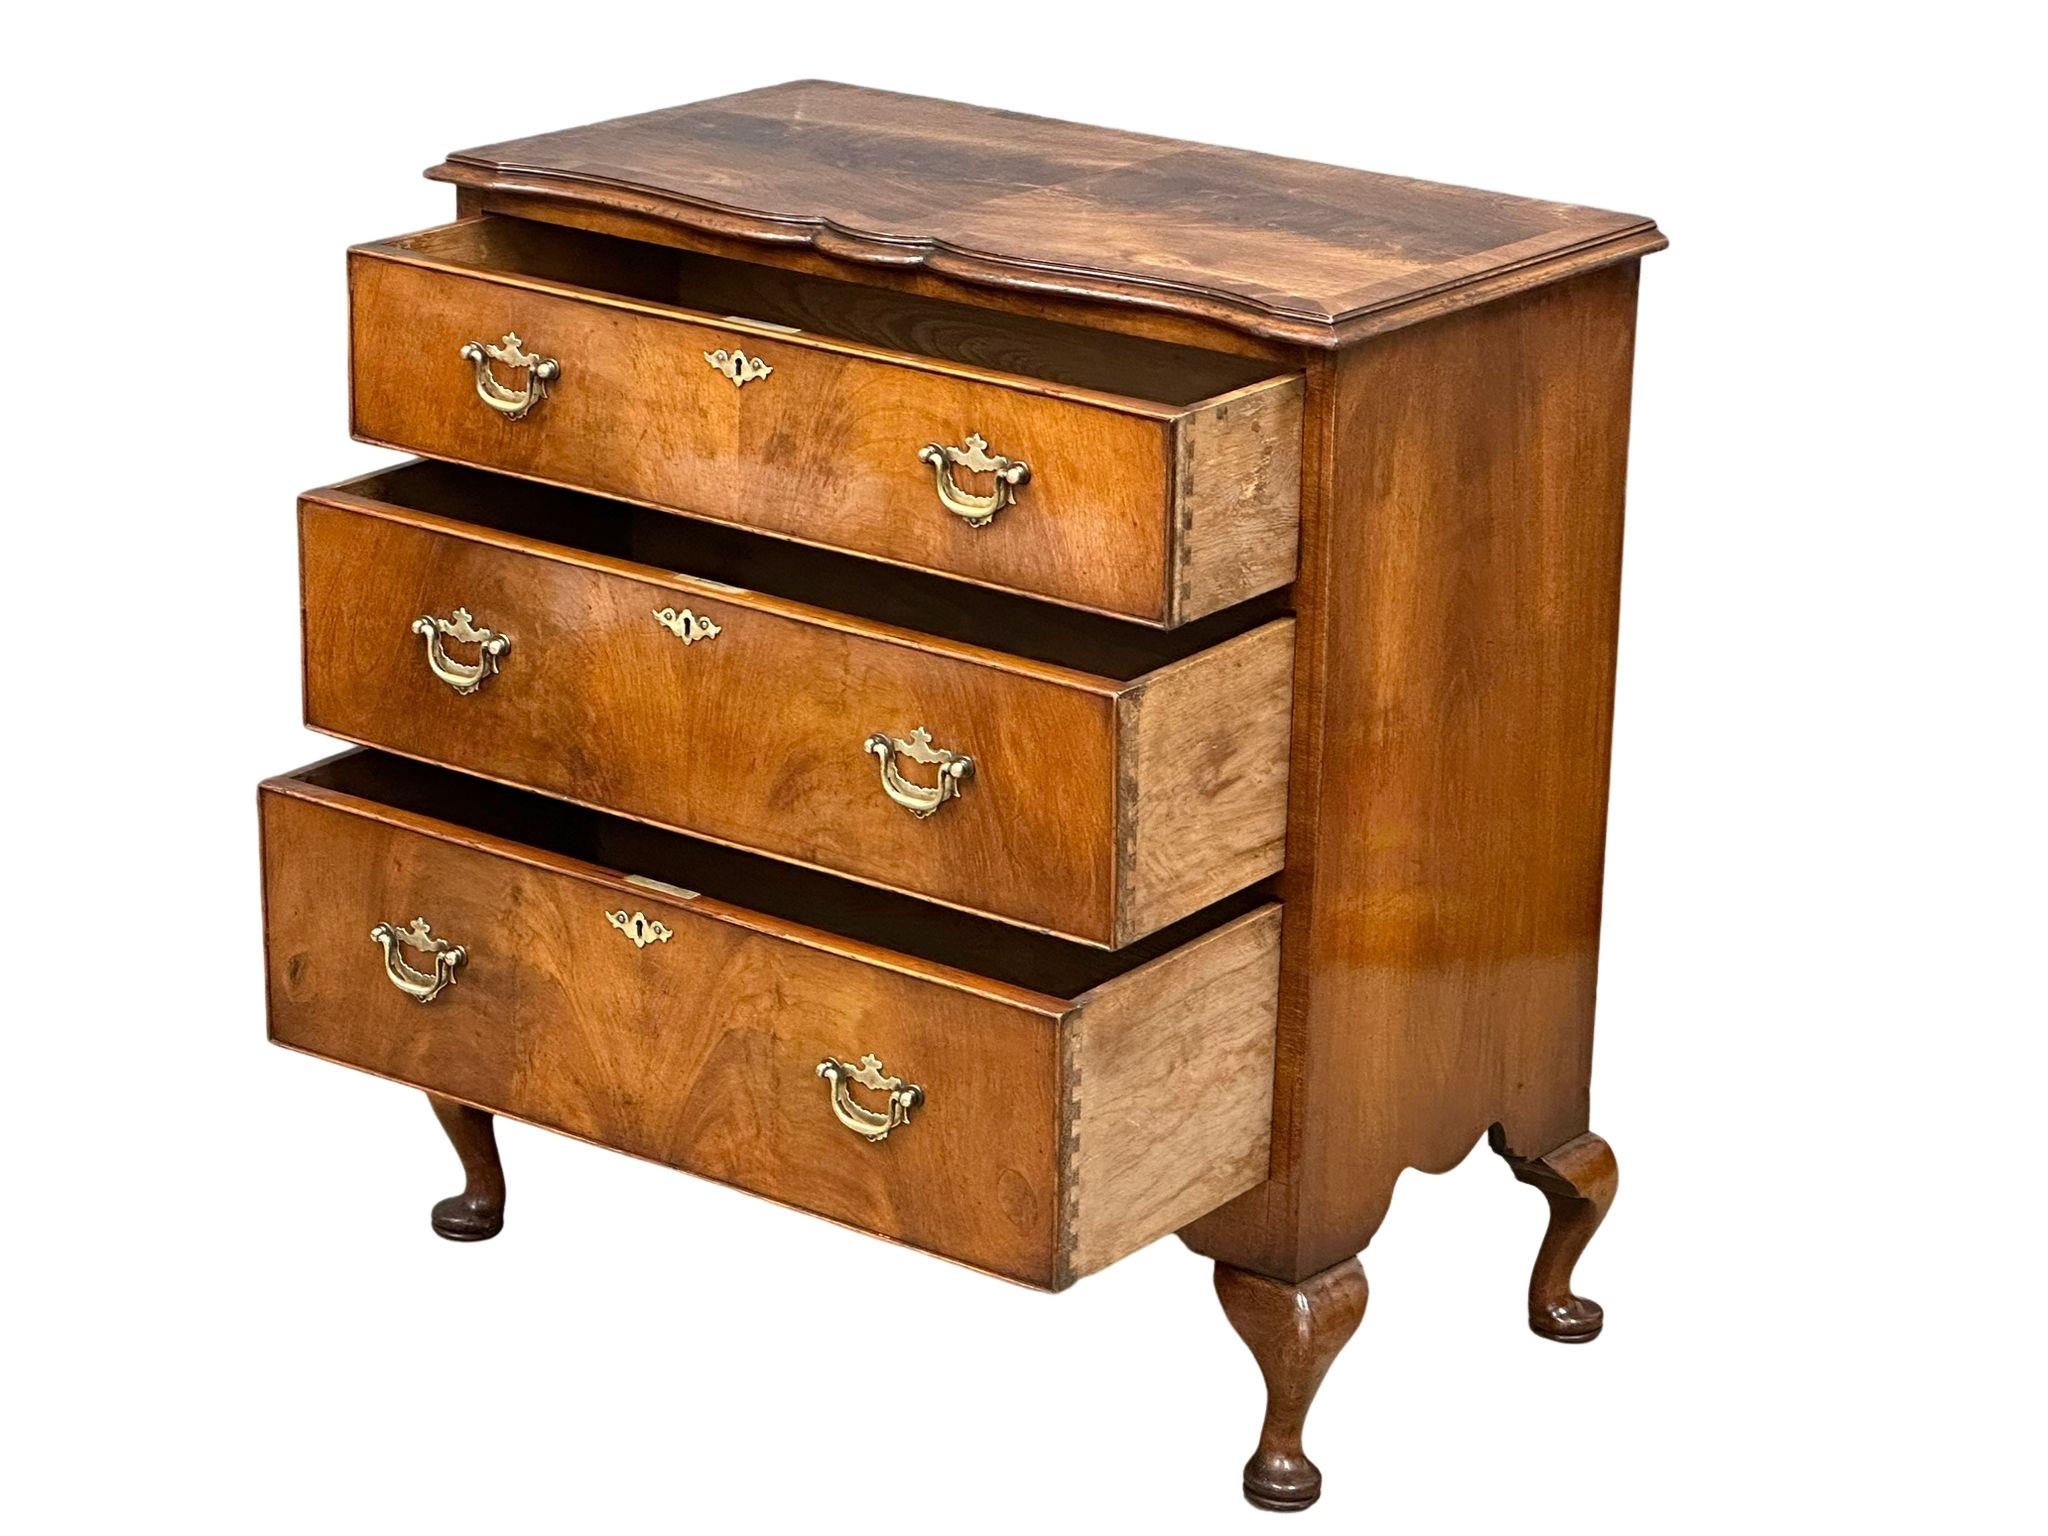 An Early 20th Century George I style walnut chest of drawers. 1930. 84x46x90cm - Image 2 of 5